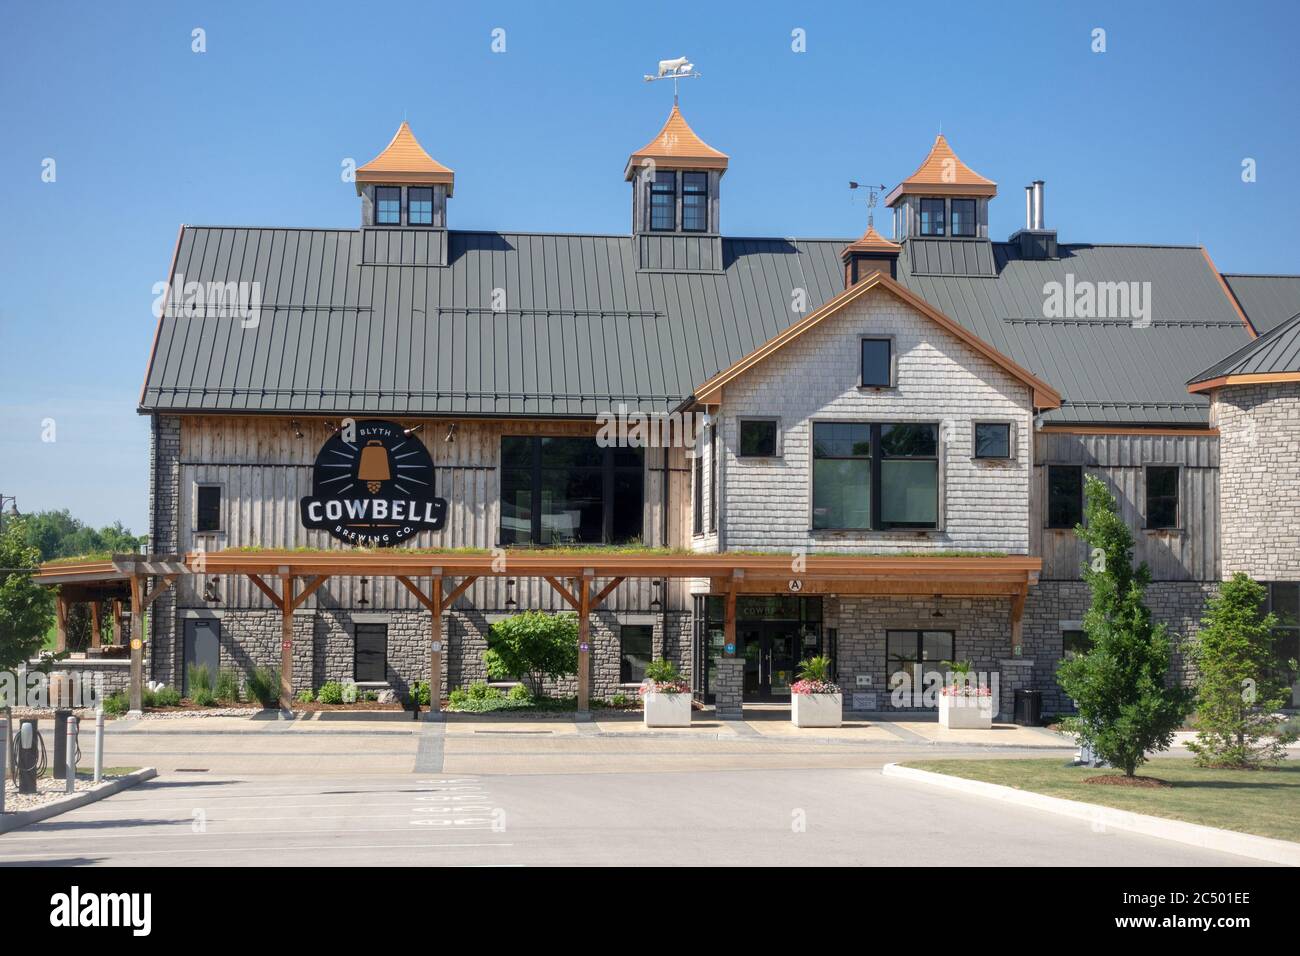 Cowbell Brewery And Restaurant A Craft Beer Company In Blythe Ontario Canada Stock Photo